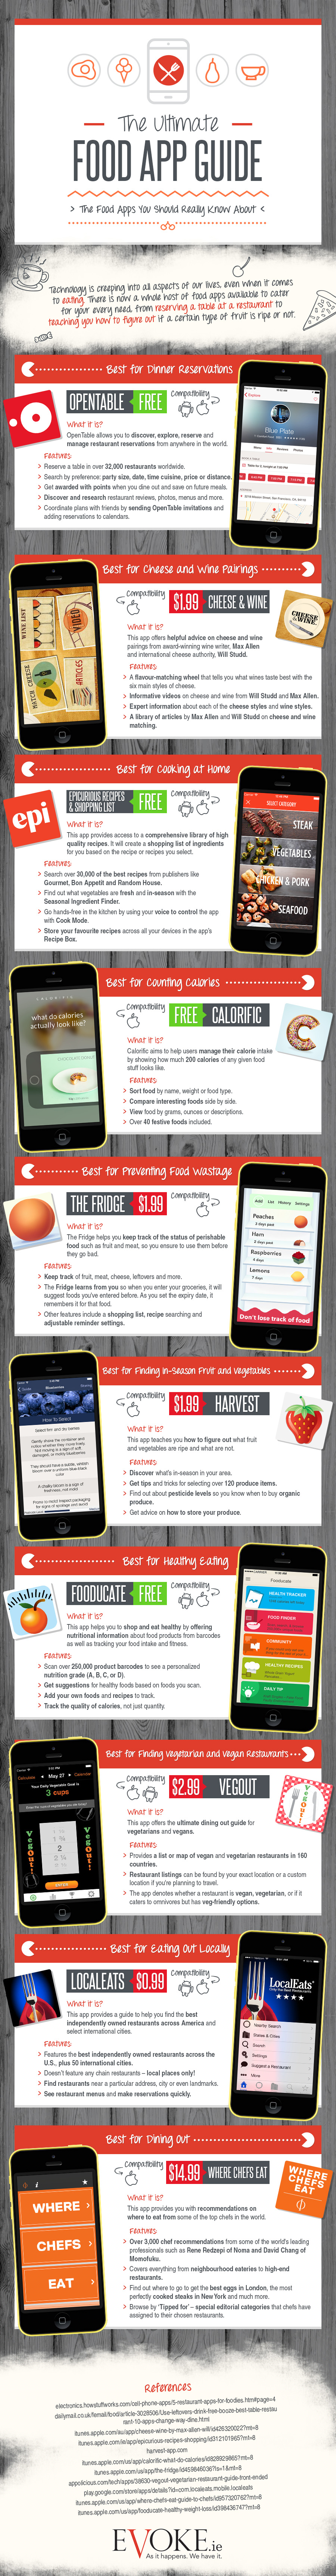 Food-App-Guide-Infographic